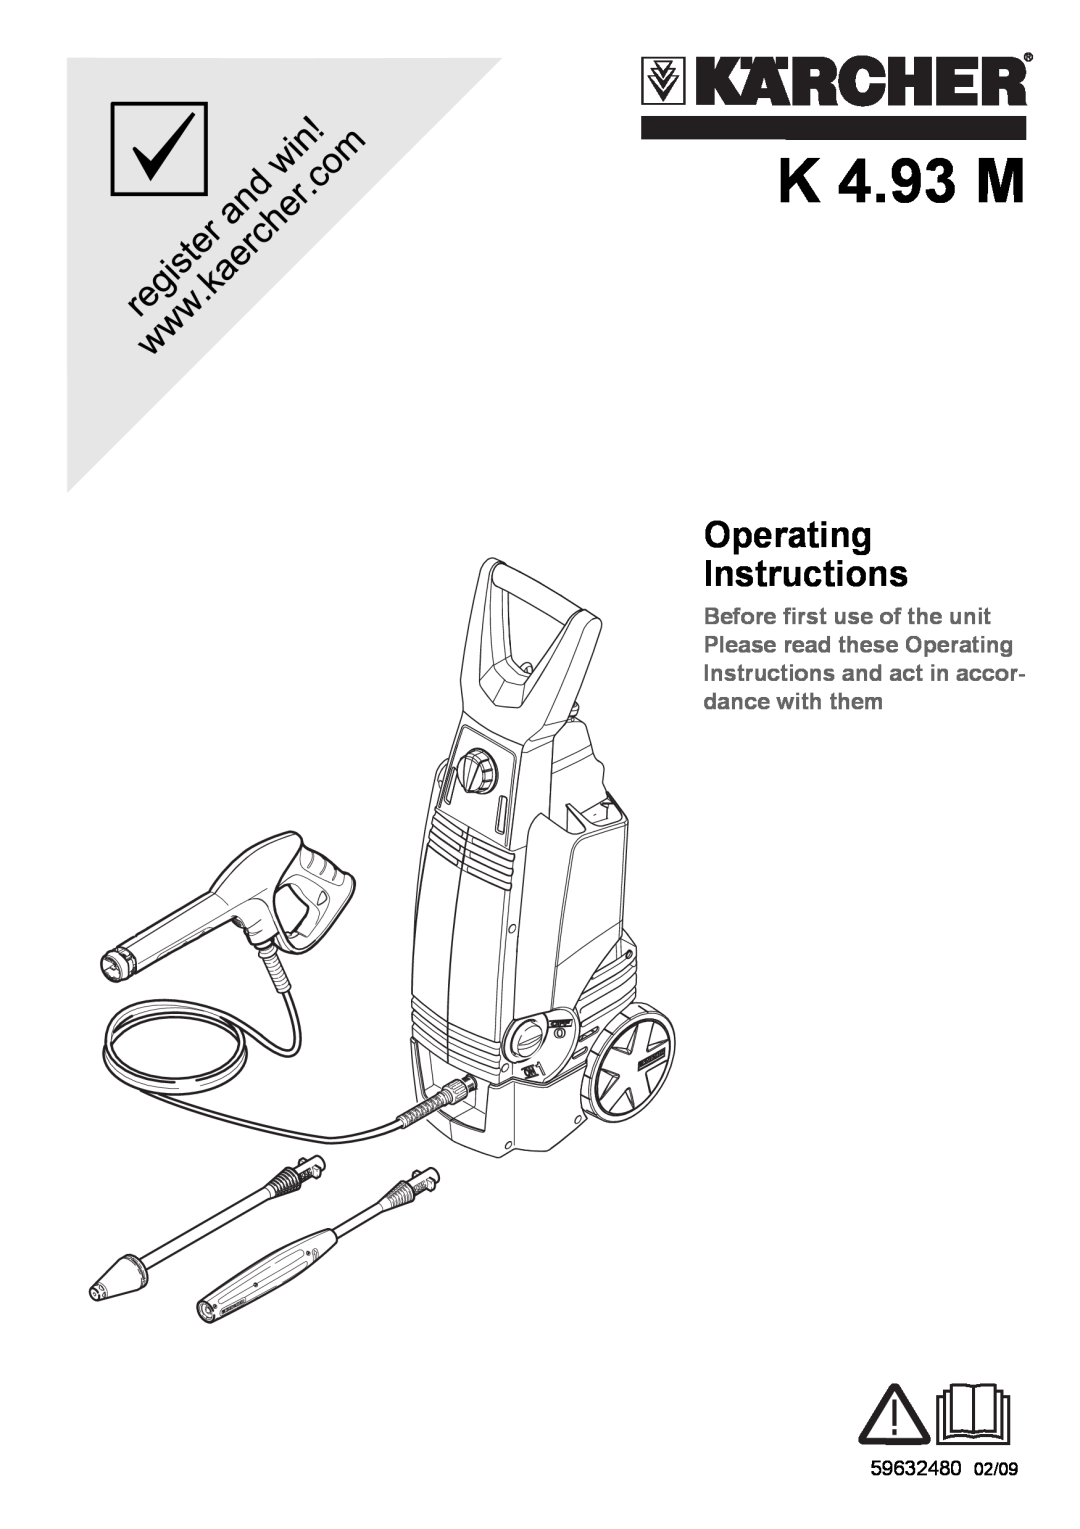 Karcher K 4.93 M operating instructions Operating Instructions 